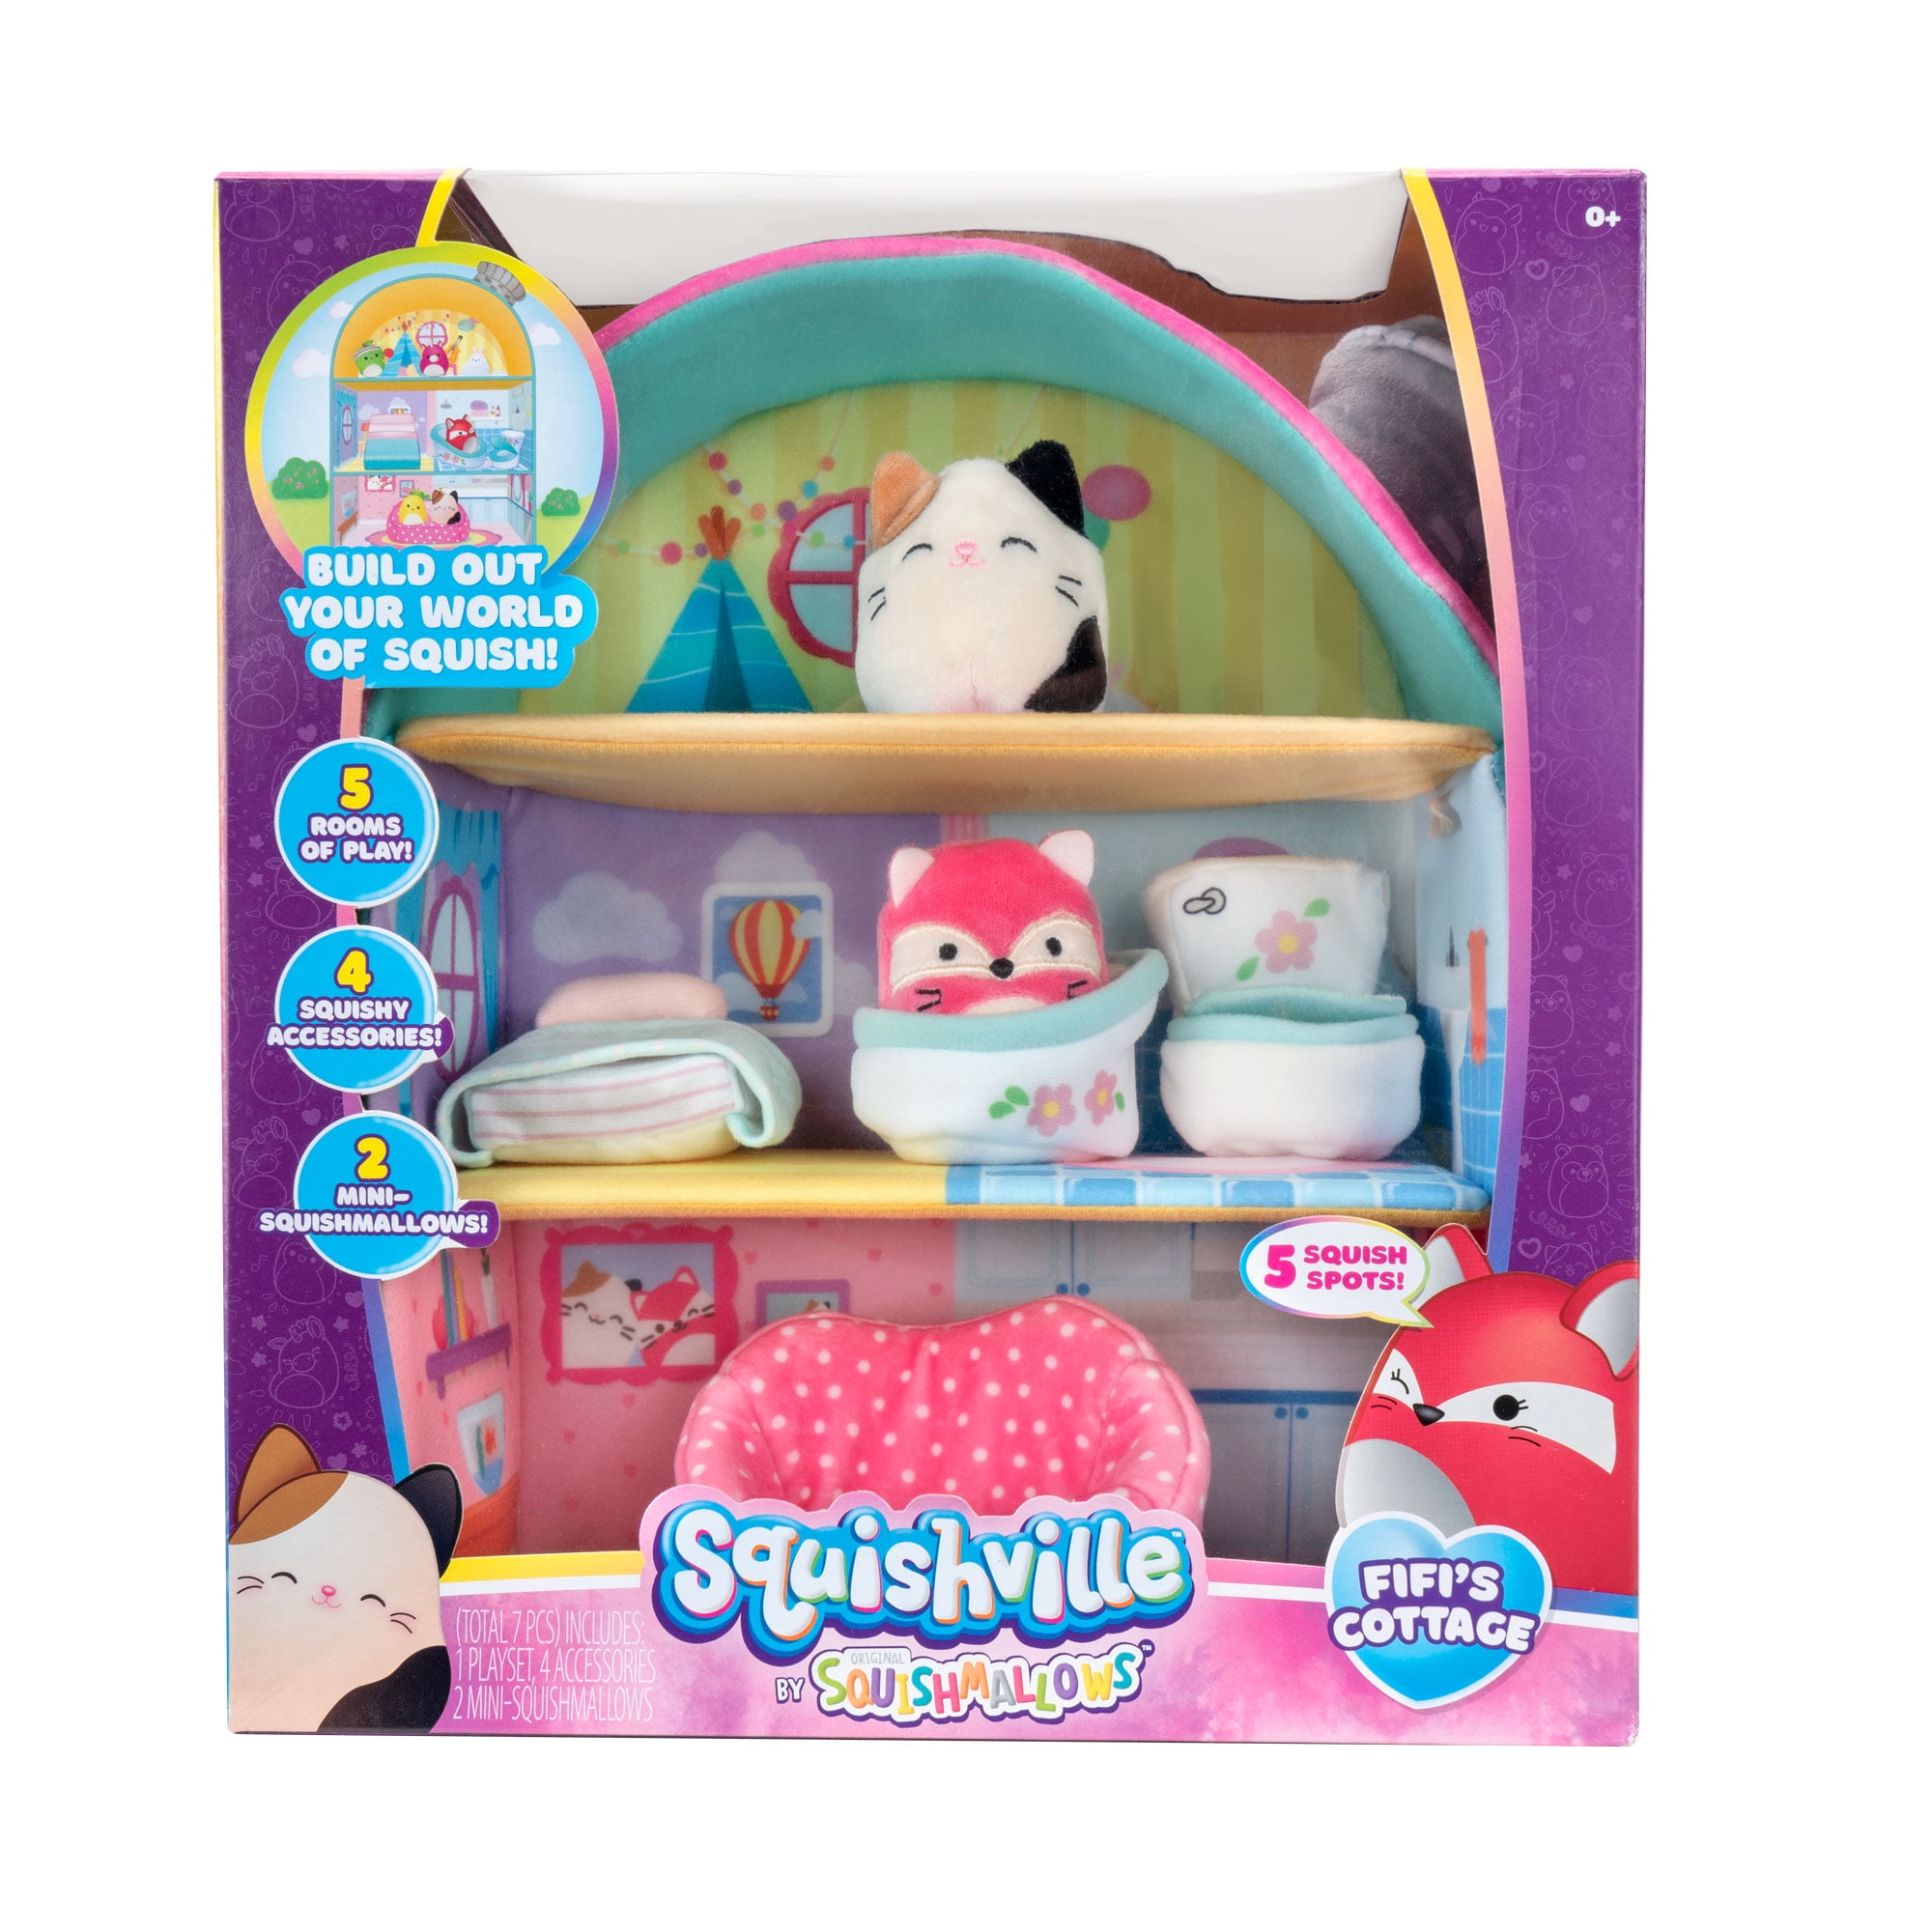 3 Floors to Explore Two 2 Mini-Squishmallow and 4 Furniture Accessories Irresistibly Soft Plush Toys Squishville by Squishmallows SQM0049 Fifi’s Cottage Townhouse 